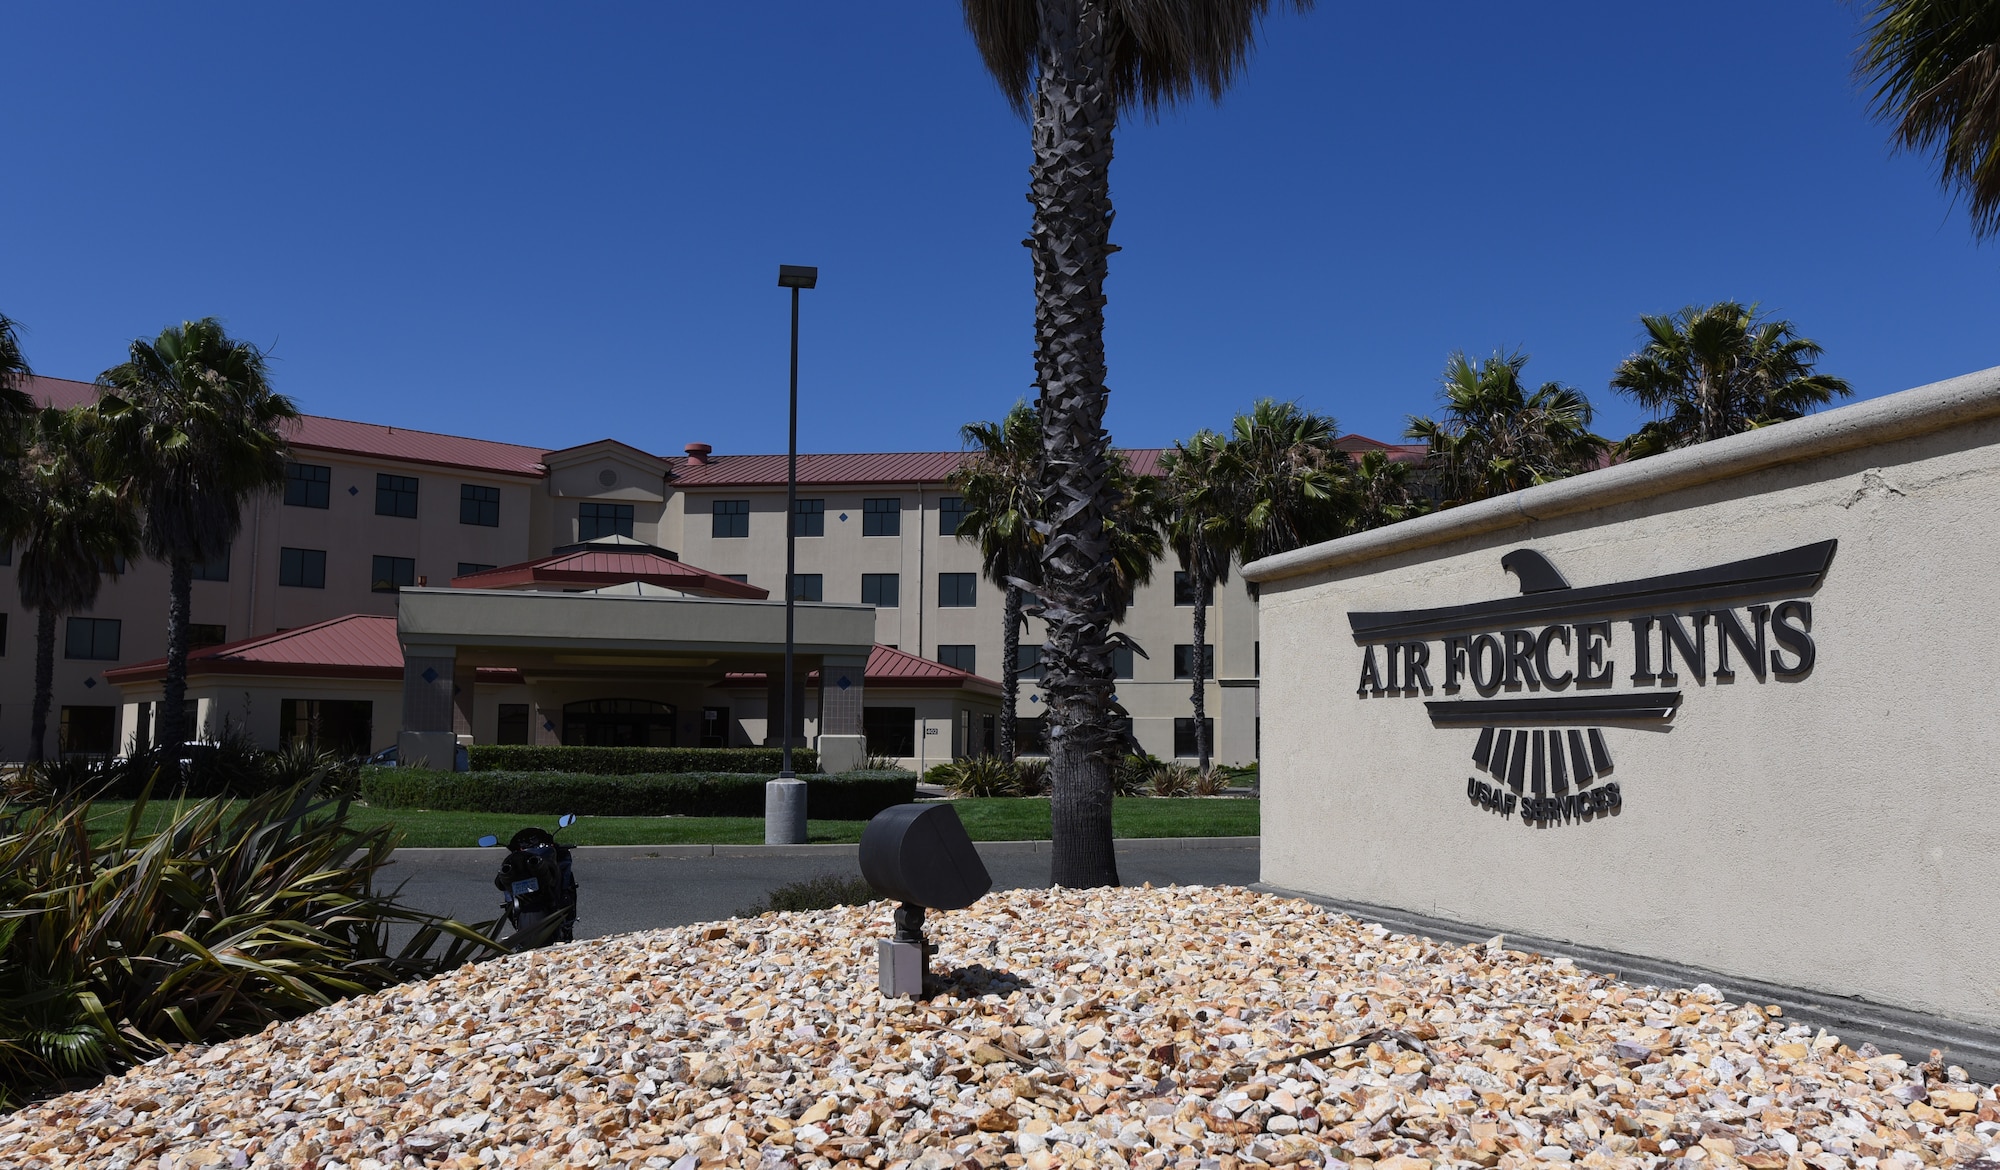 Westwind Inn is one of the finalists for the Air Force’s 2019 Innkeeper Award after being named the best in Air Mobility Command July 8, 2019, at Travis Air Force Base, California. The Innkeeper Award is an annual honor recognizing excellence in the service’s lodging operations. (U.S. Air Force photo by Airman 1st Class Cameron Otte)